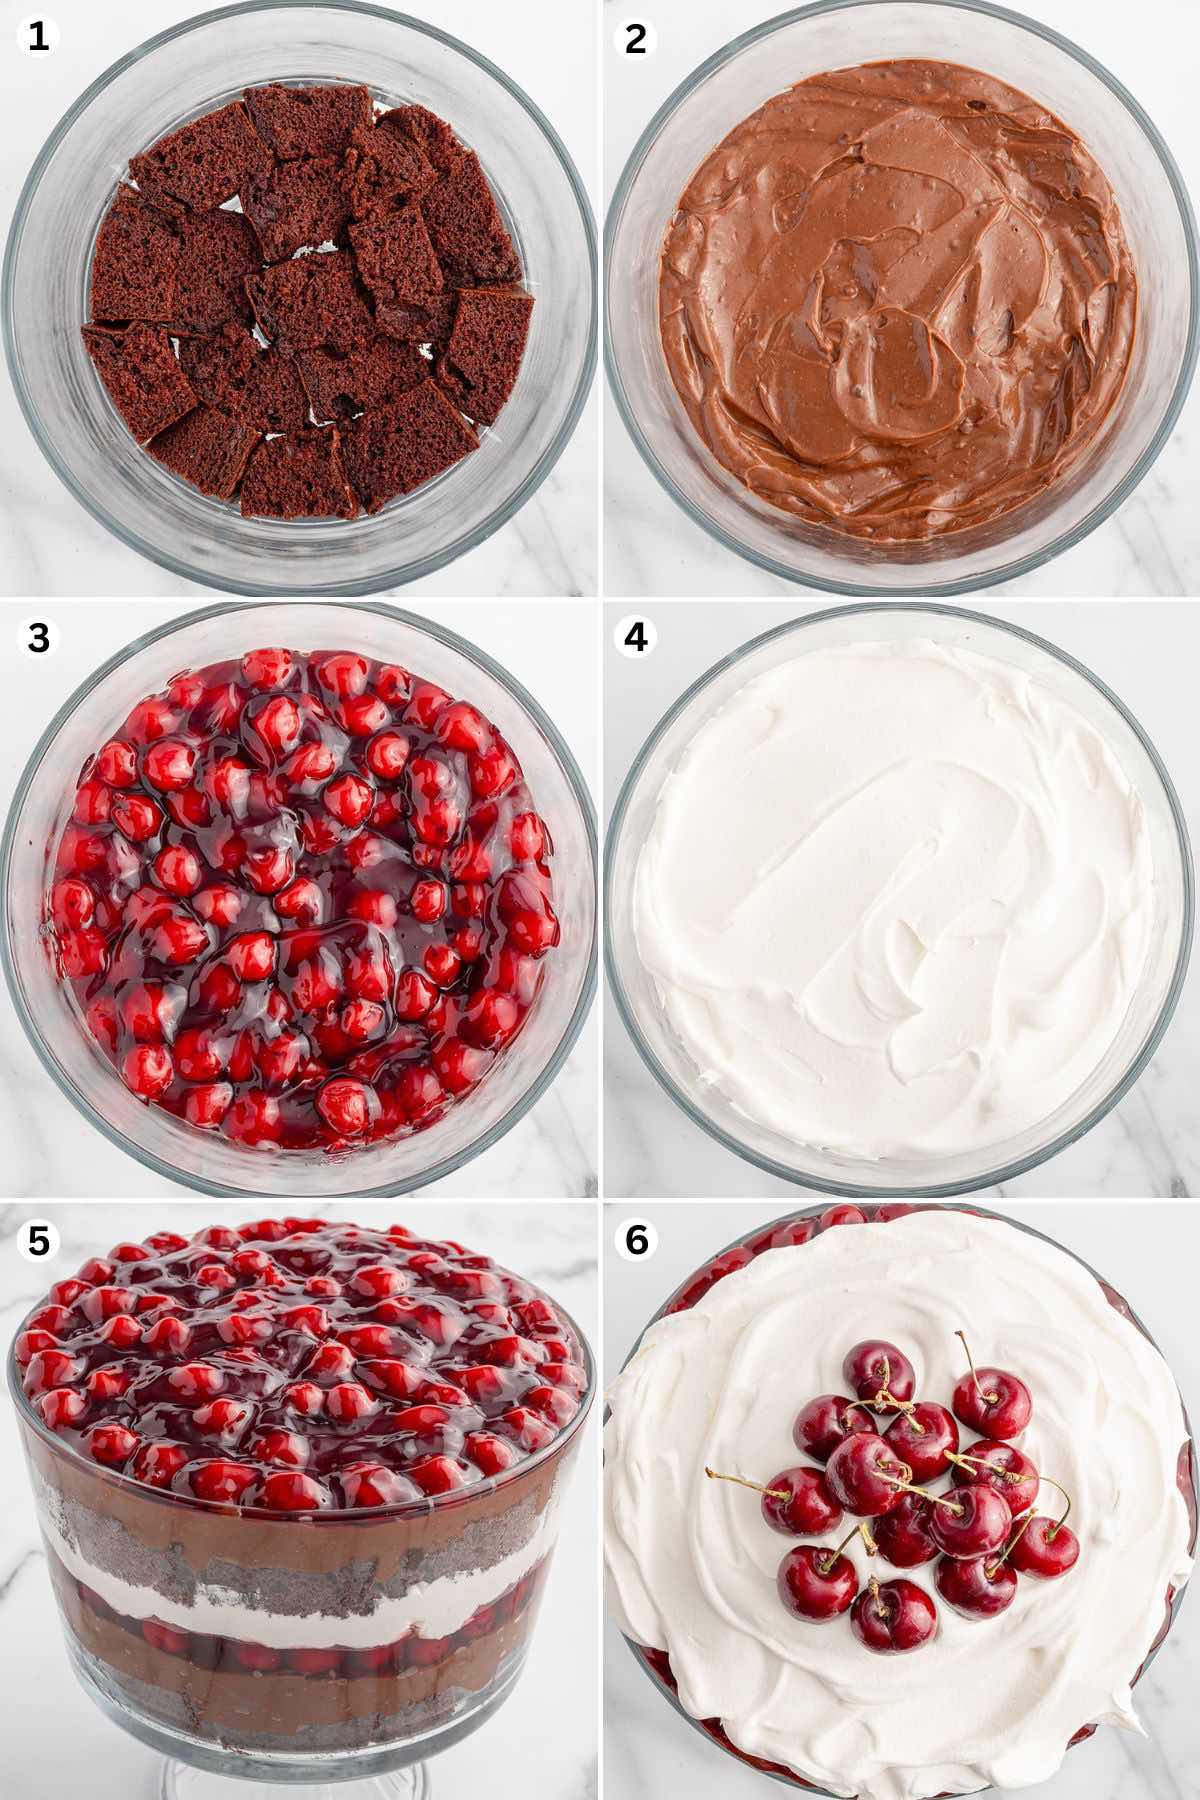 Create a layer of cake cubes at the bottom of the trifle dish, cover with pudding, spread cherry pie filling on top, and finish with a layer of whipped topping.